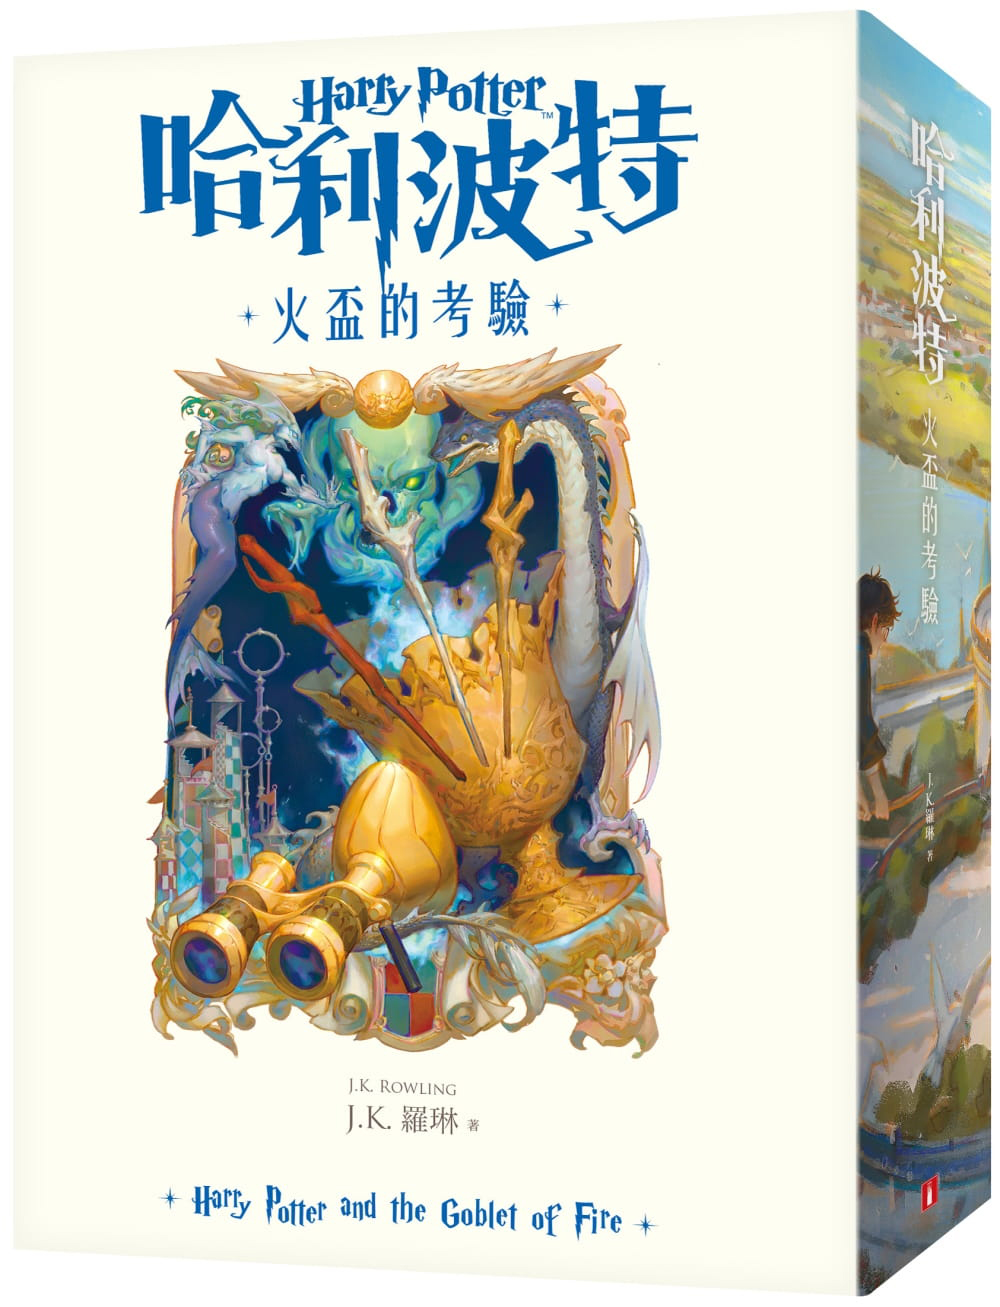 ‘Goblet of Fire’ Traditional Chinese 20th anniversary edition